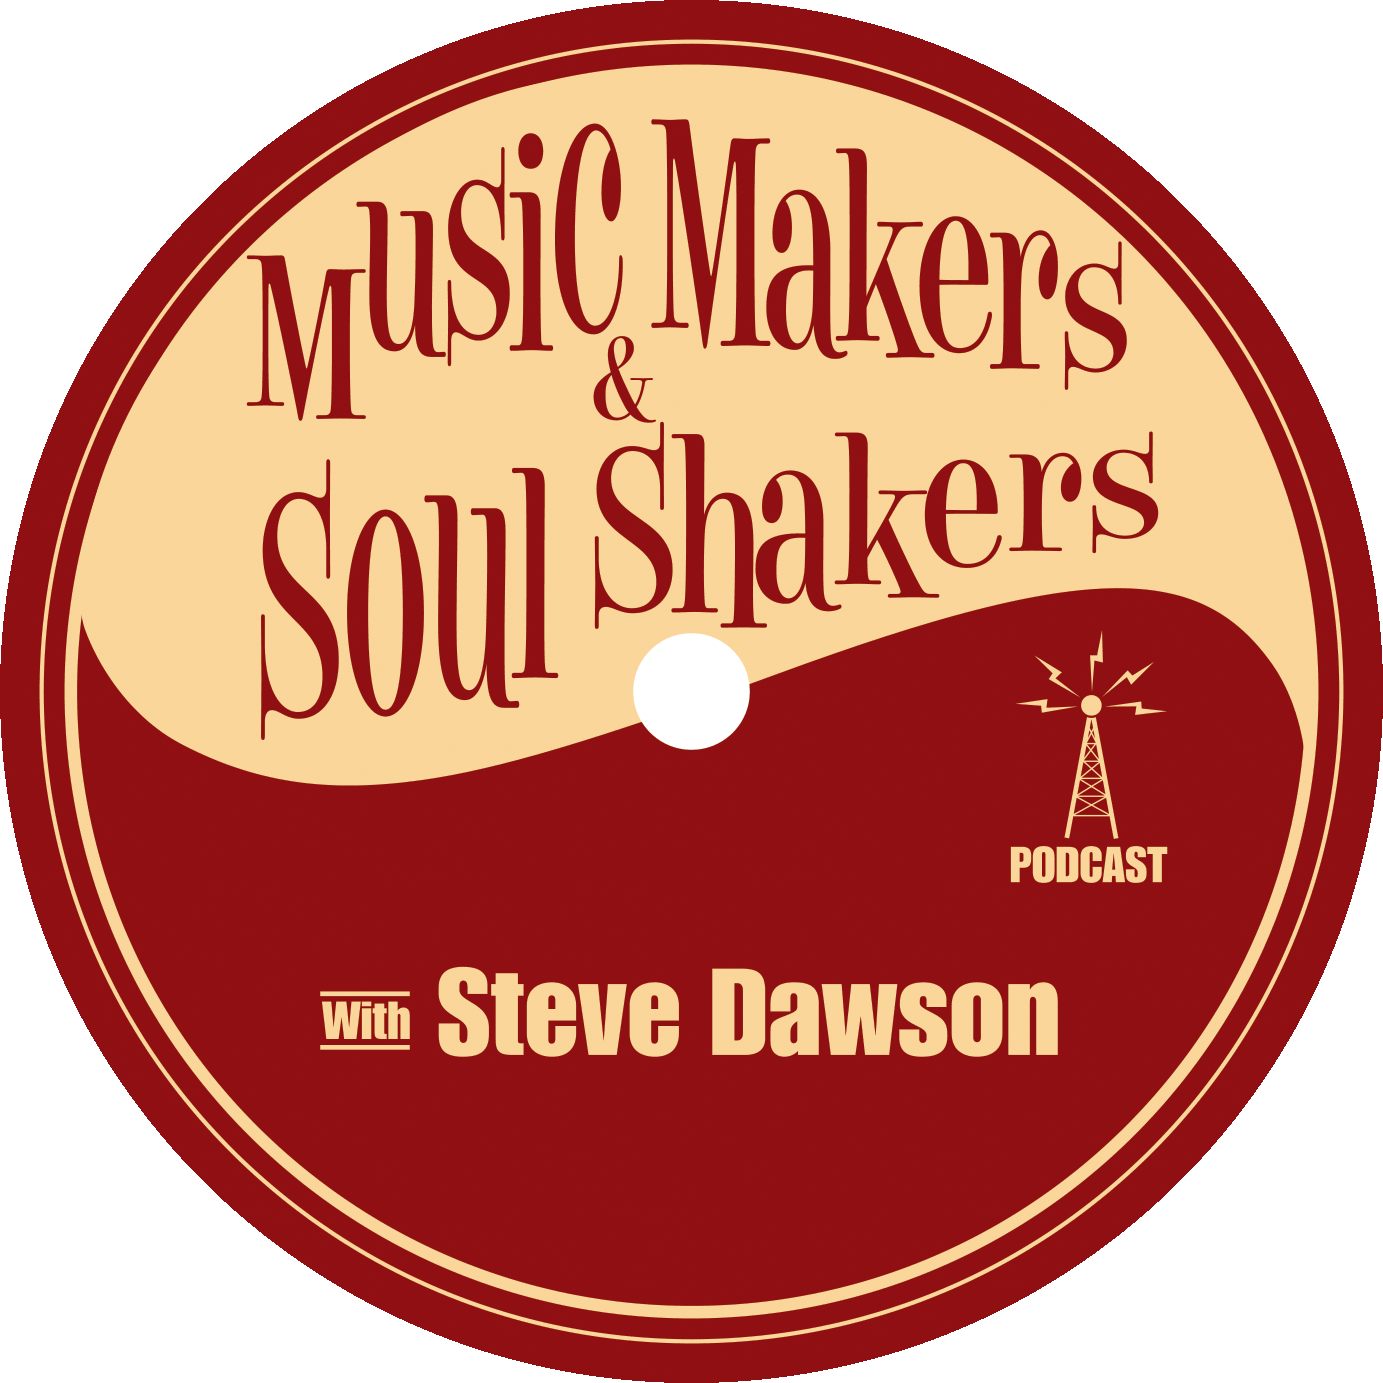 Music Makers and Soul Shakers Podcast